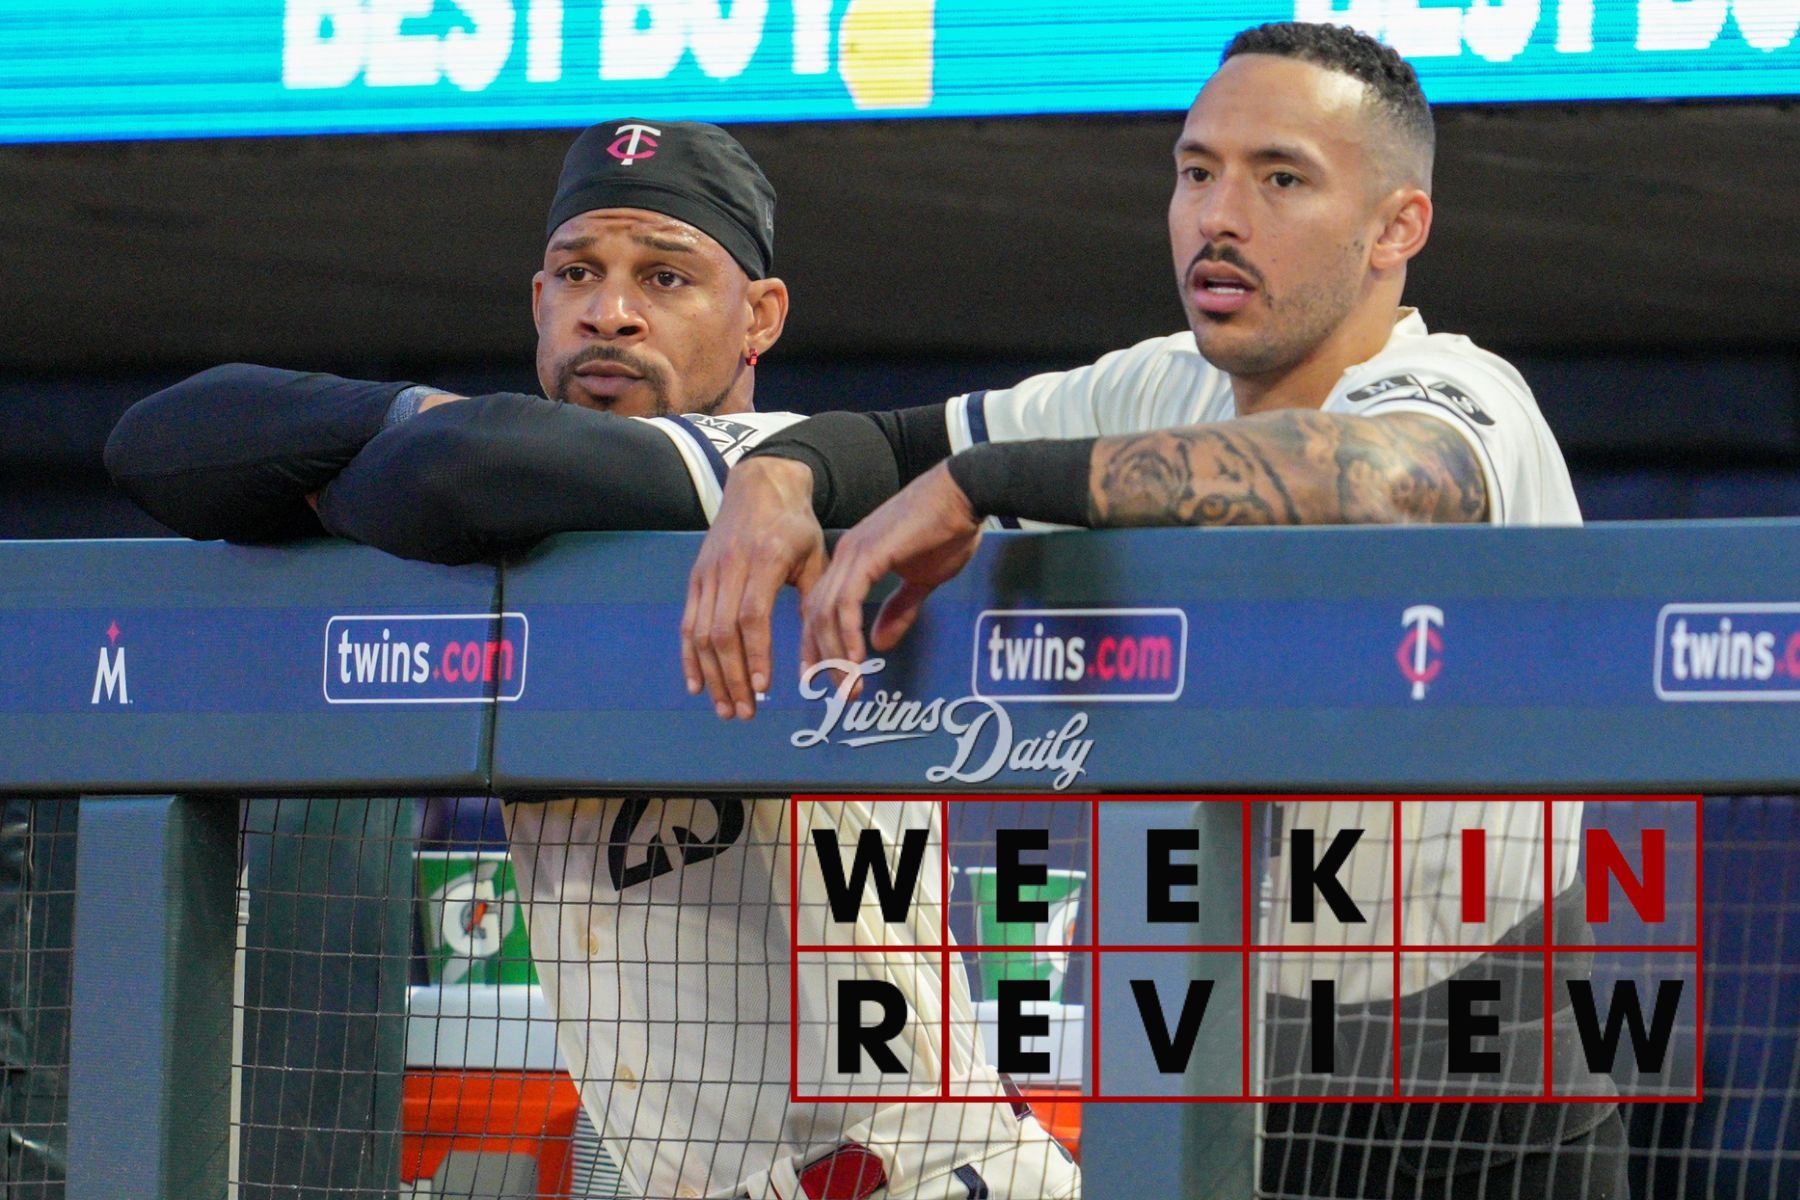 Week in Review: Lewis Returns, Division Lead Grows - Twins - Twins Daily